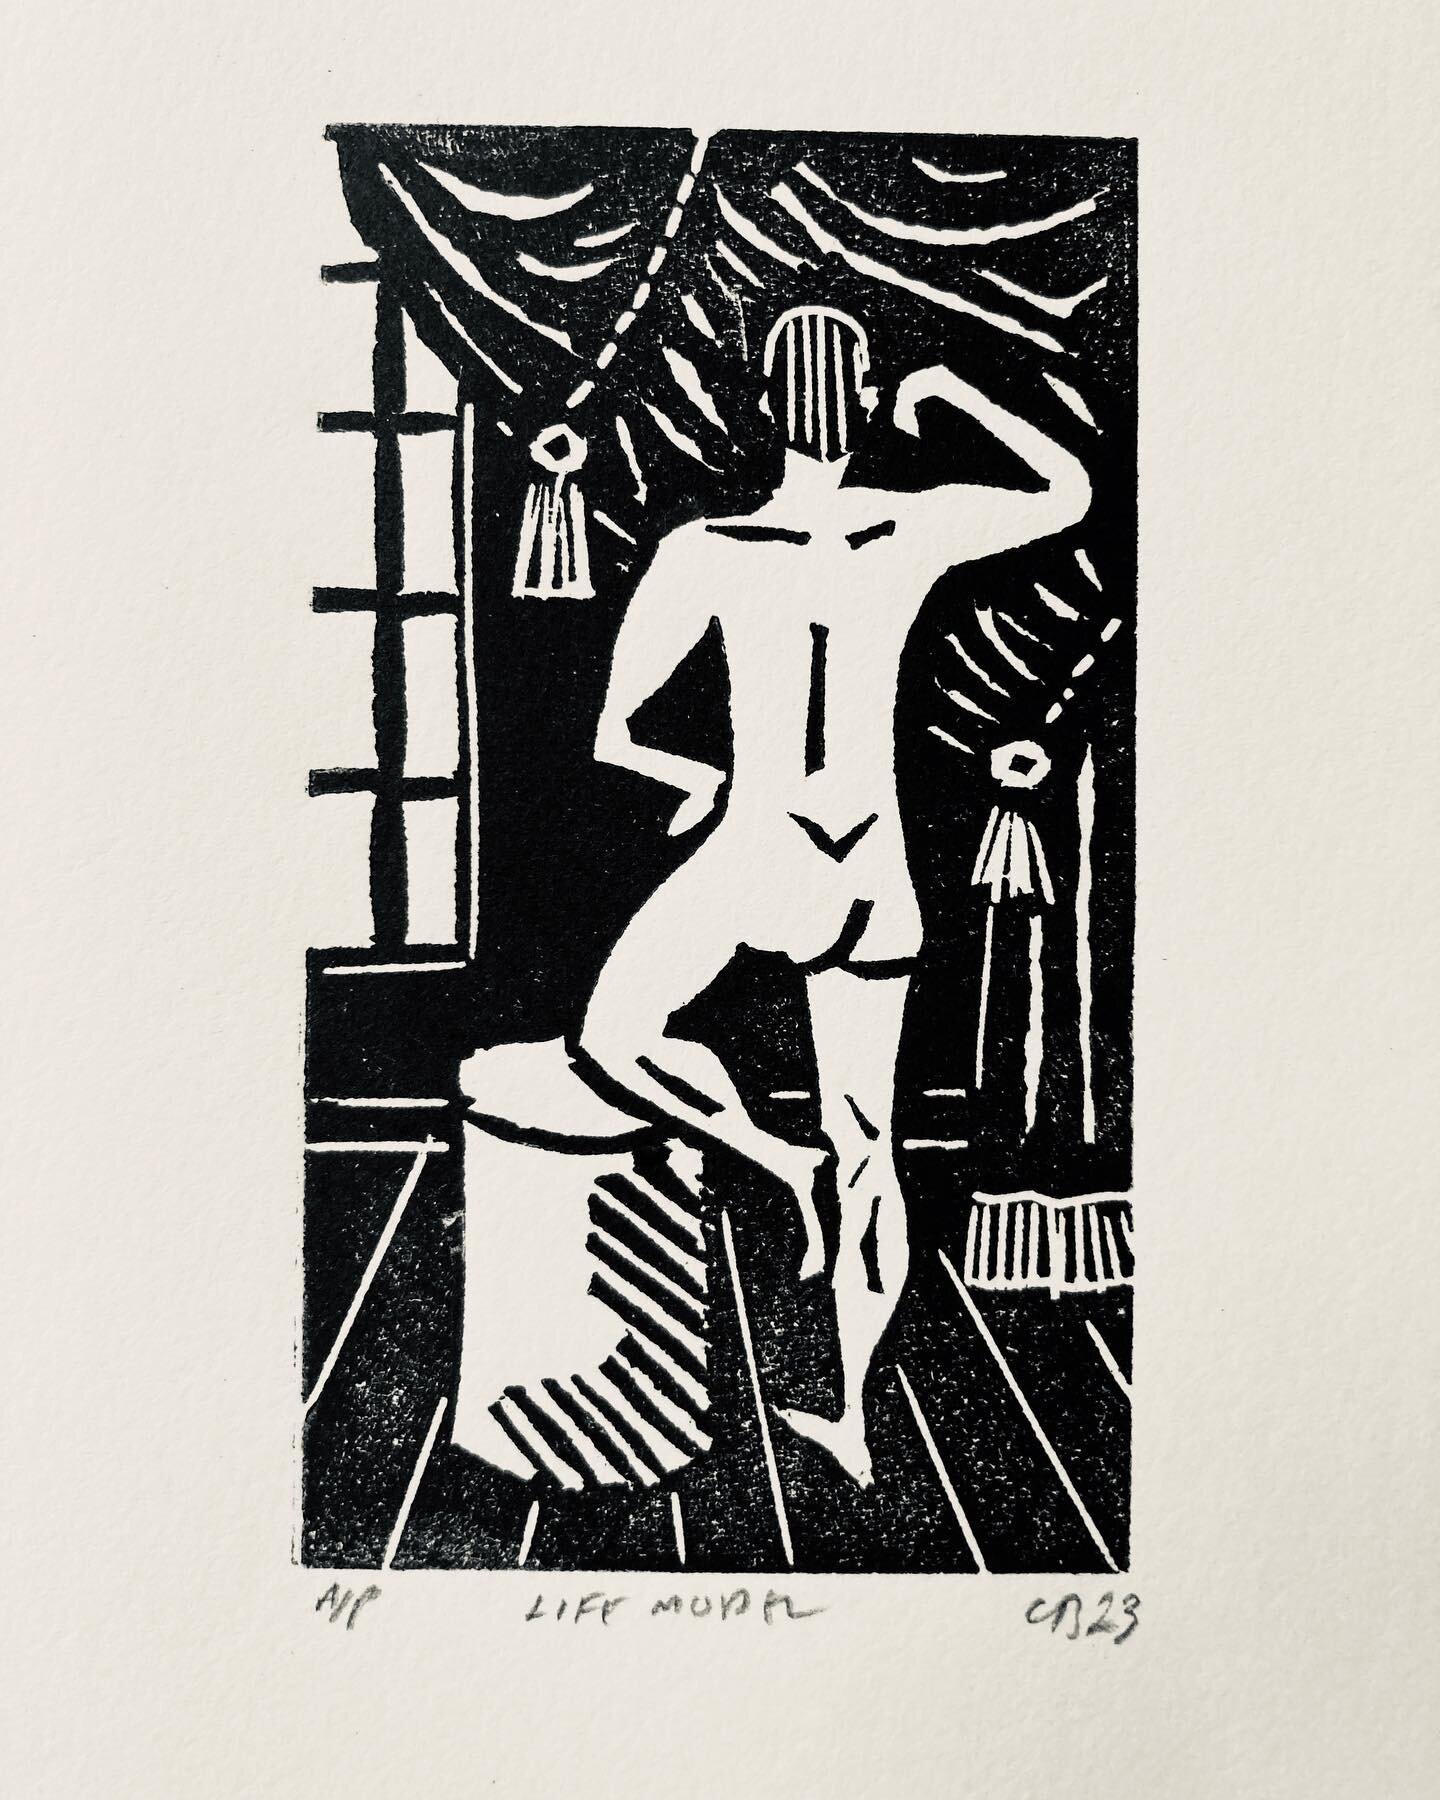 Monday Model . A Model for Monday . 🏵️LIFE MODEL 🏵️Linocut by @christopherbrownlino . Image Size: 8.5 x 5 Paper Size: 19 x 13.5 Unframed Artists Proof Available &pound;35.00 including UK postage . #lifemodel #lifedrawing #mondaymodel #model #nudemo